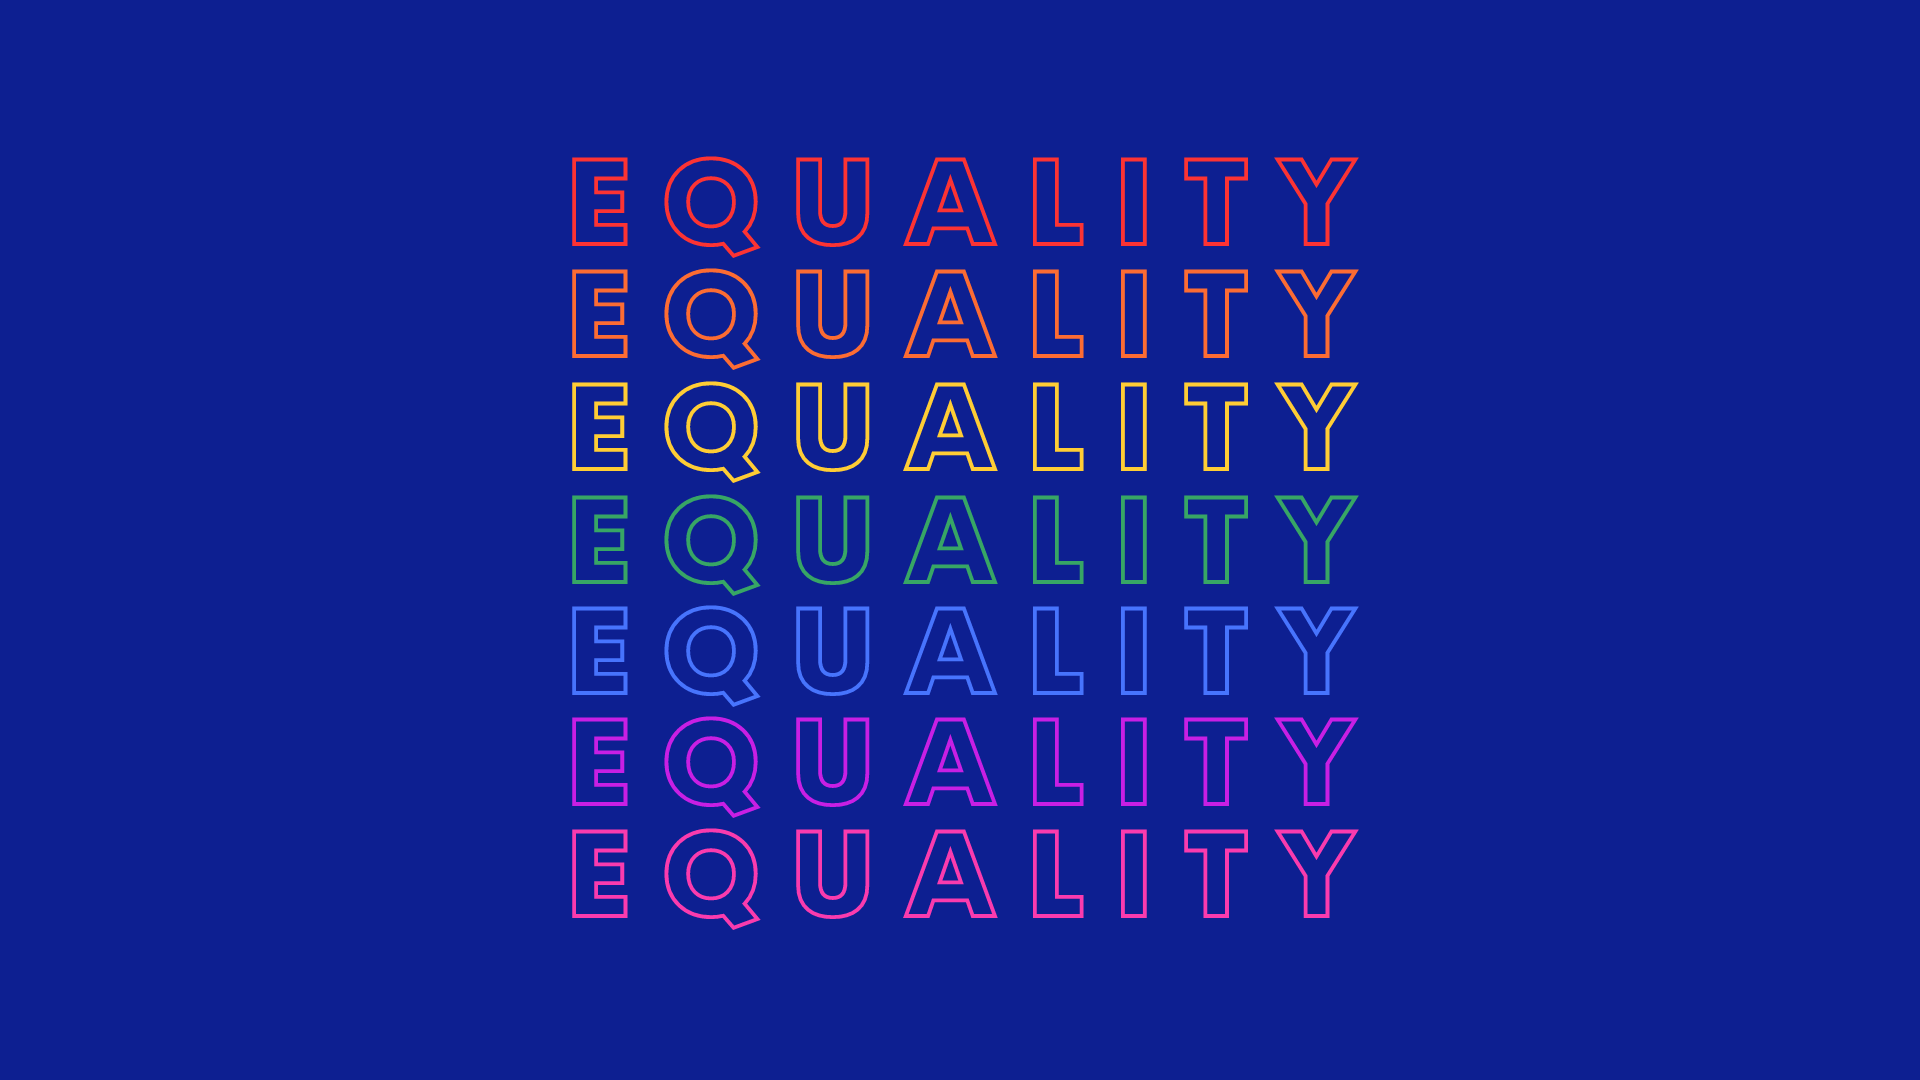 Equality in rainbow colors